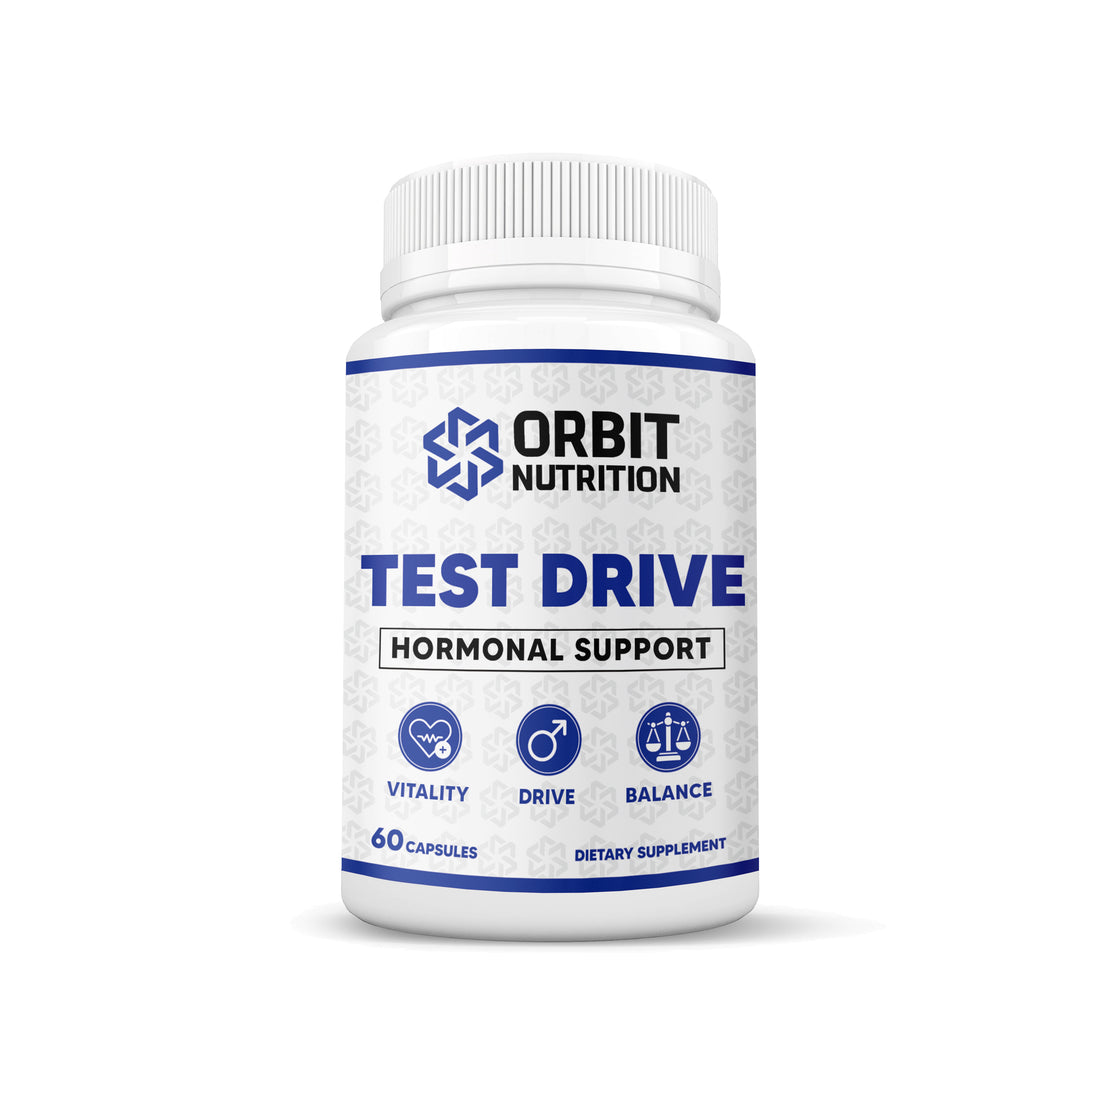 TEST DRIVE - NEW STOCK ARRIVING JULY 10th - Pre Orders Available